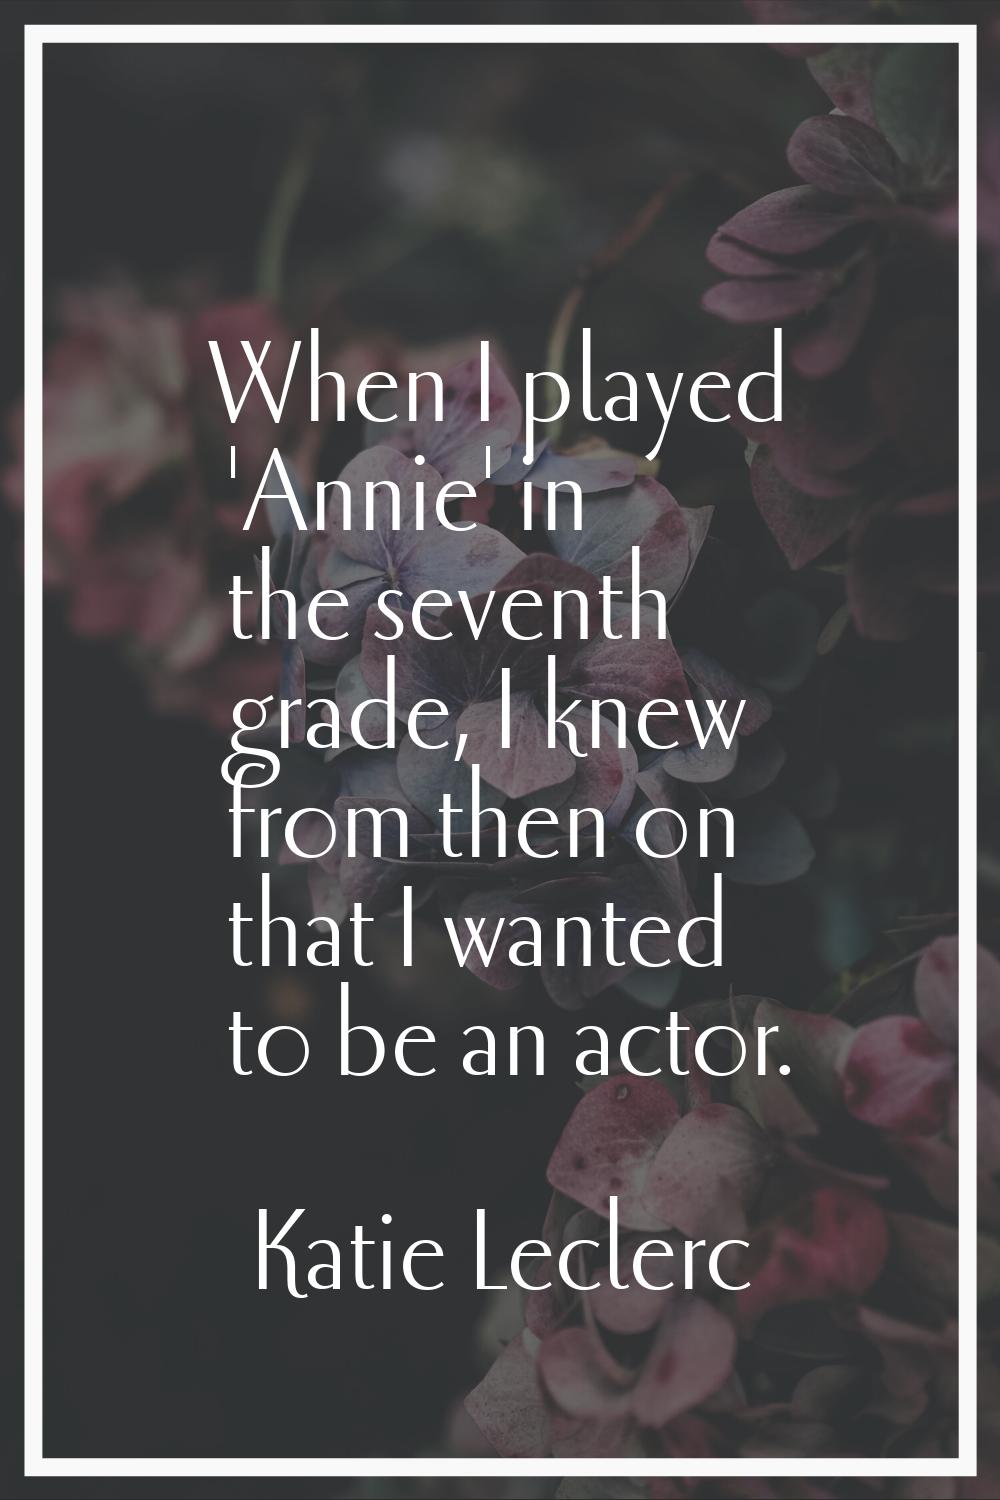 When I played 'Annie' in the seventh grade, I knew from then on that I wanted to be an actor.